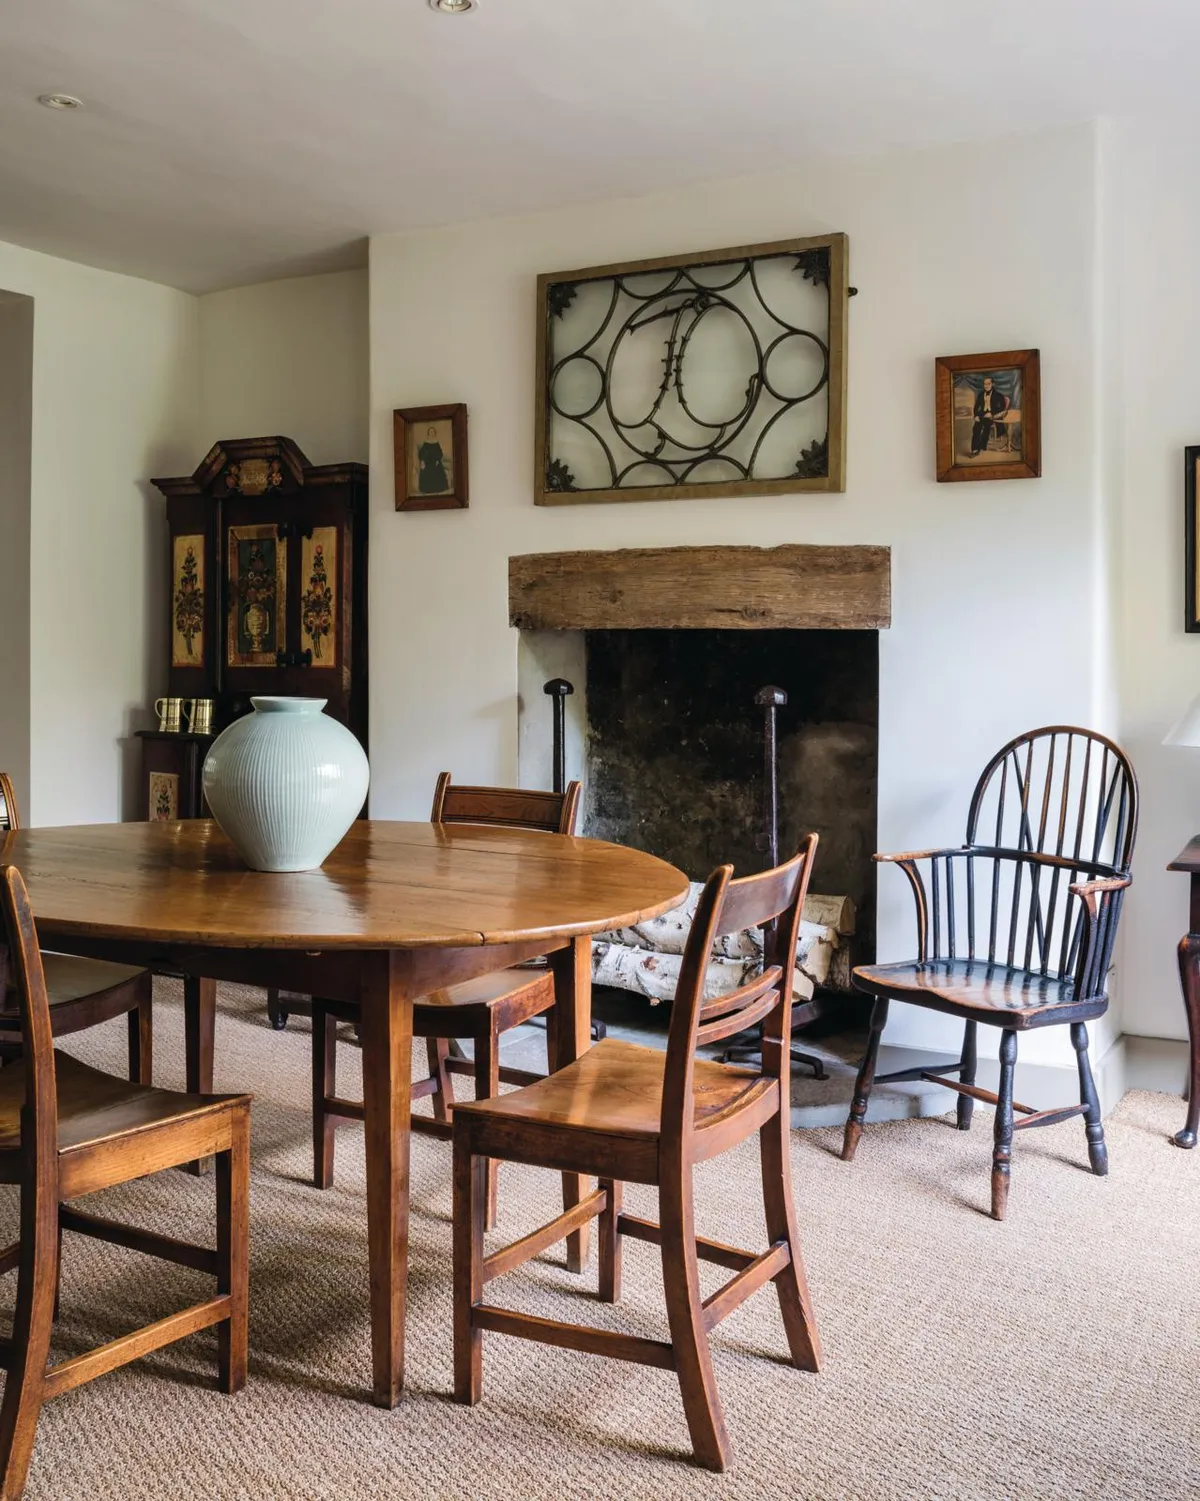 18th-century home, dining room table and fireplace.